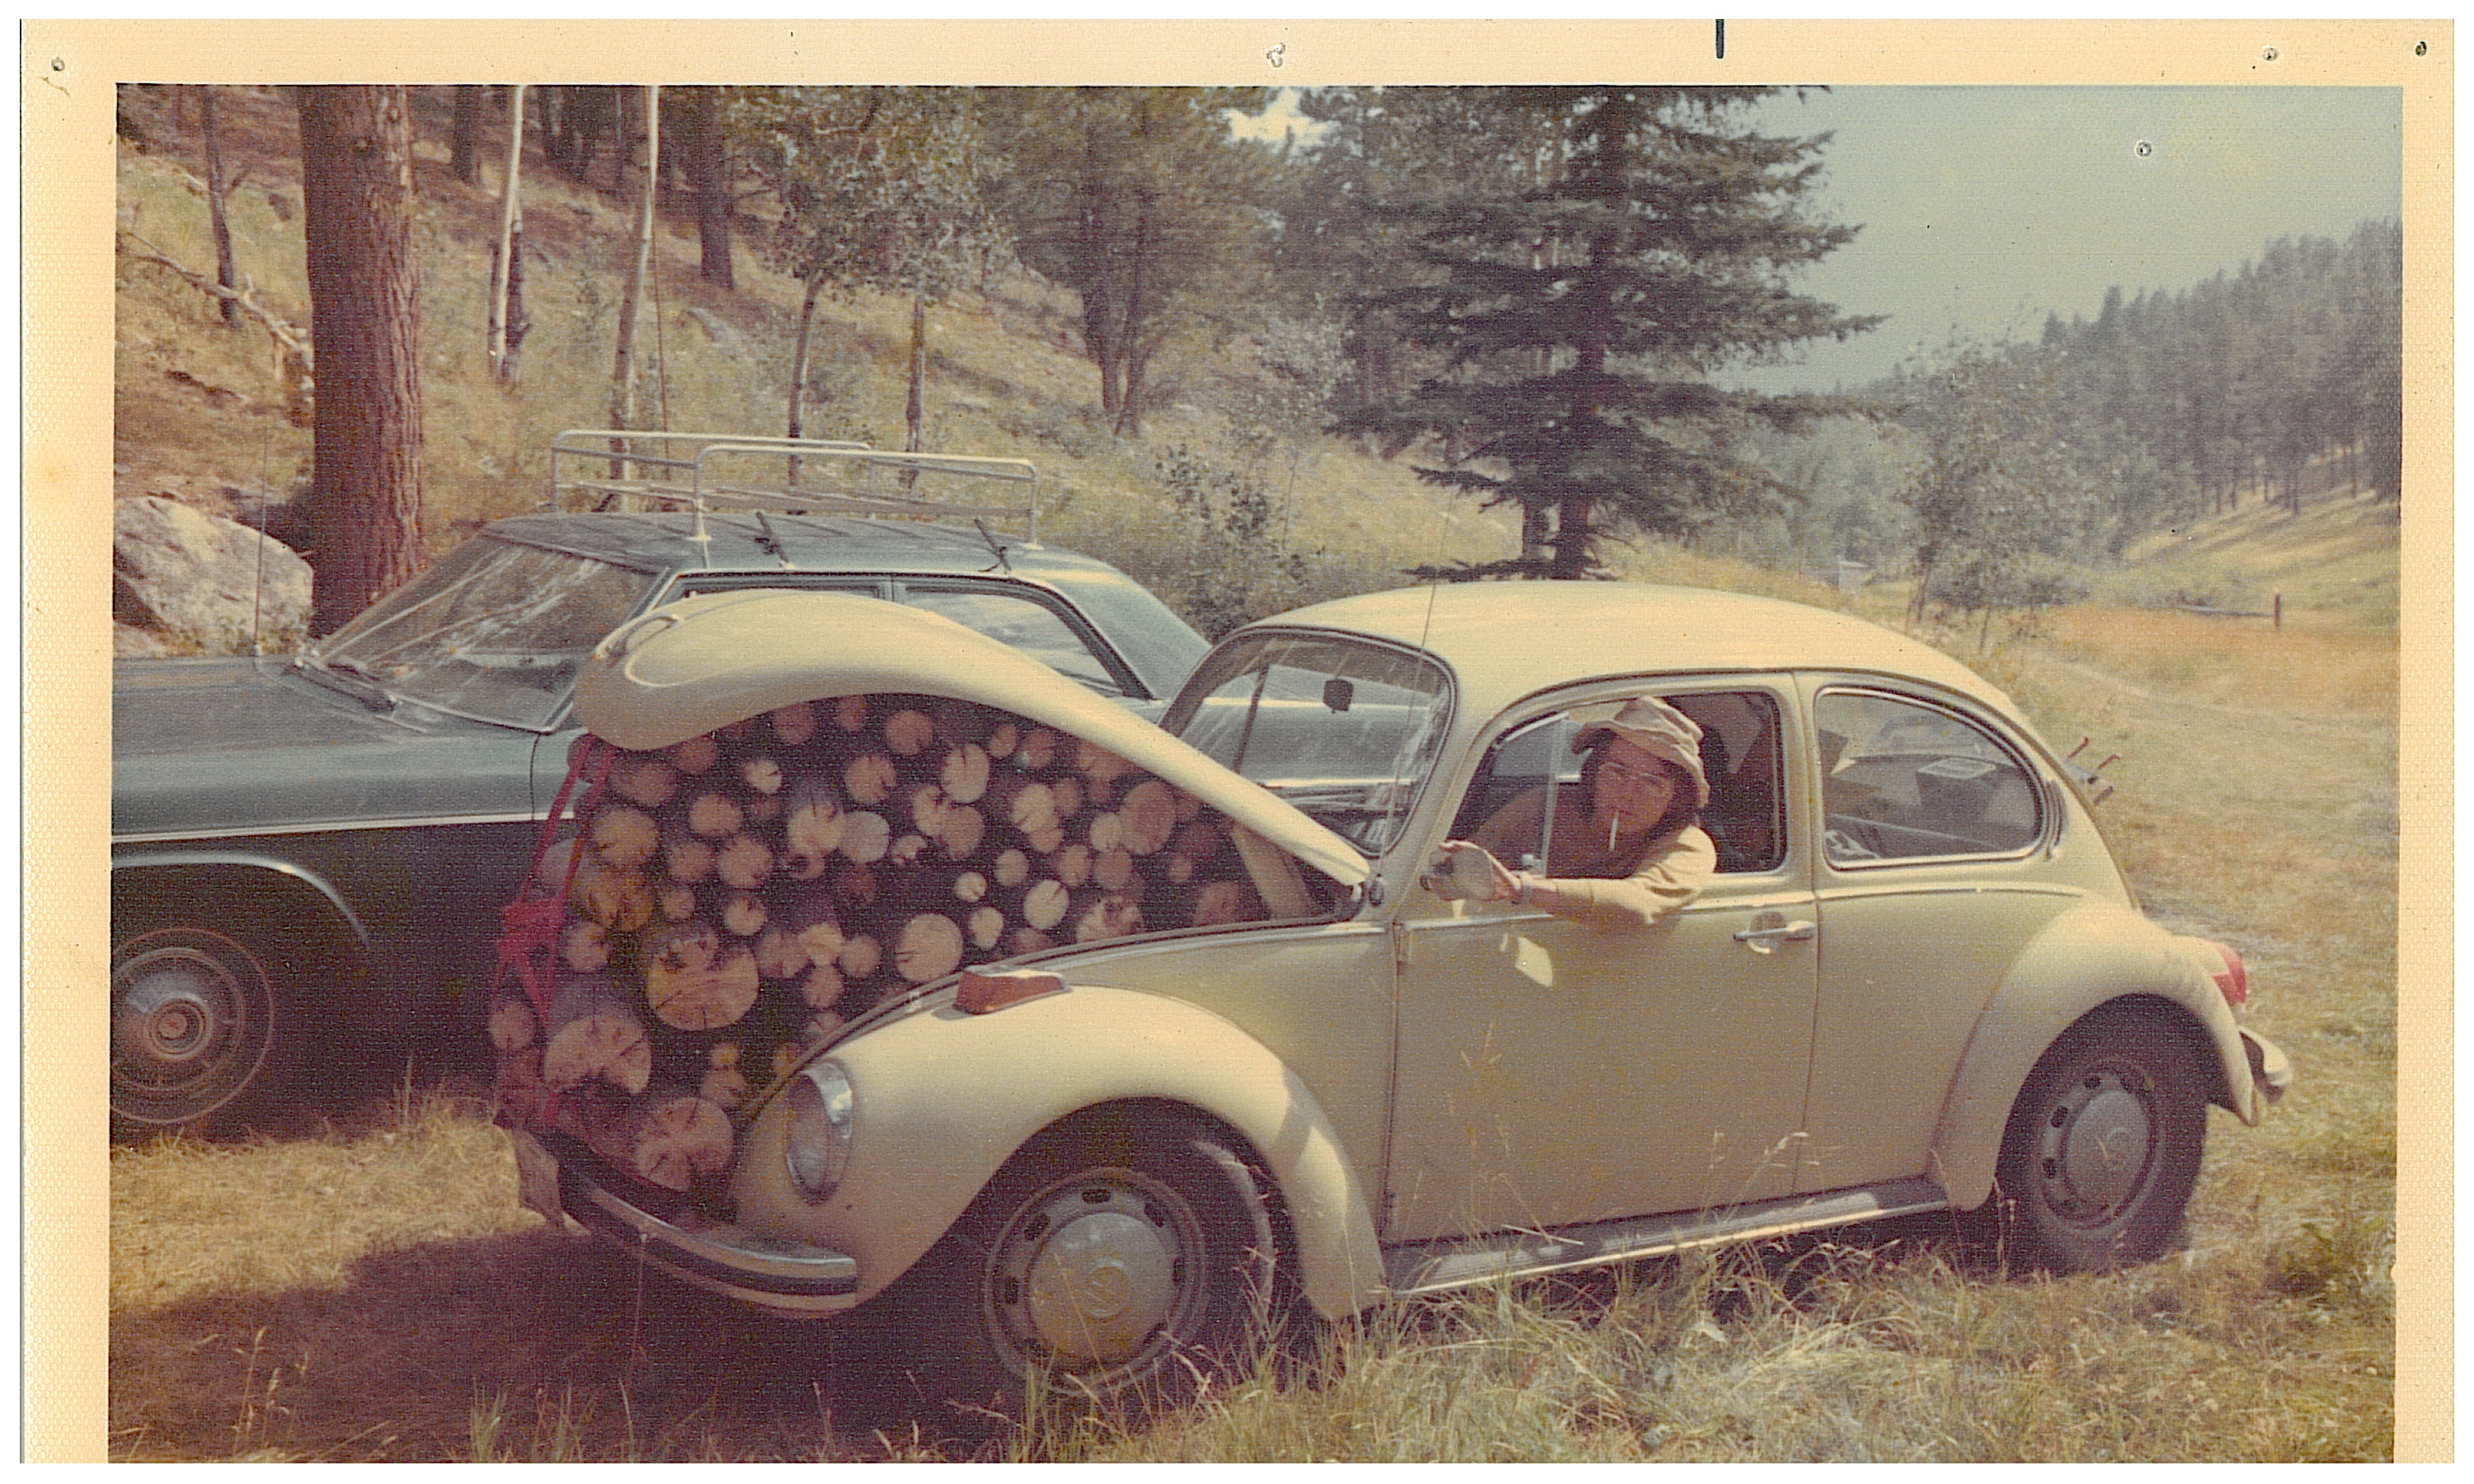 Historic photo of man smoking a cigarette leaning out a VW beetle window. Car is packed with firewood.